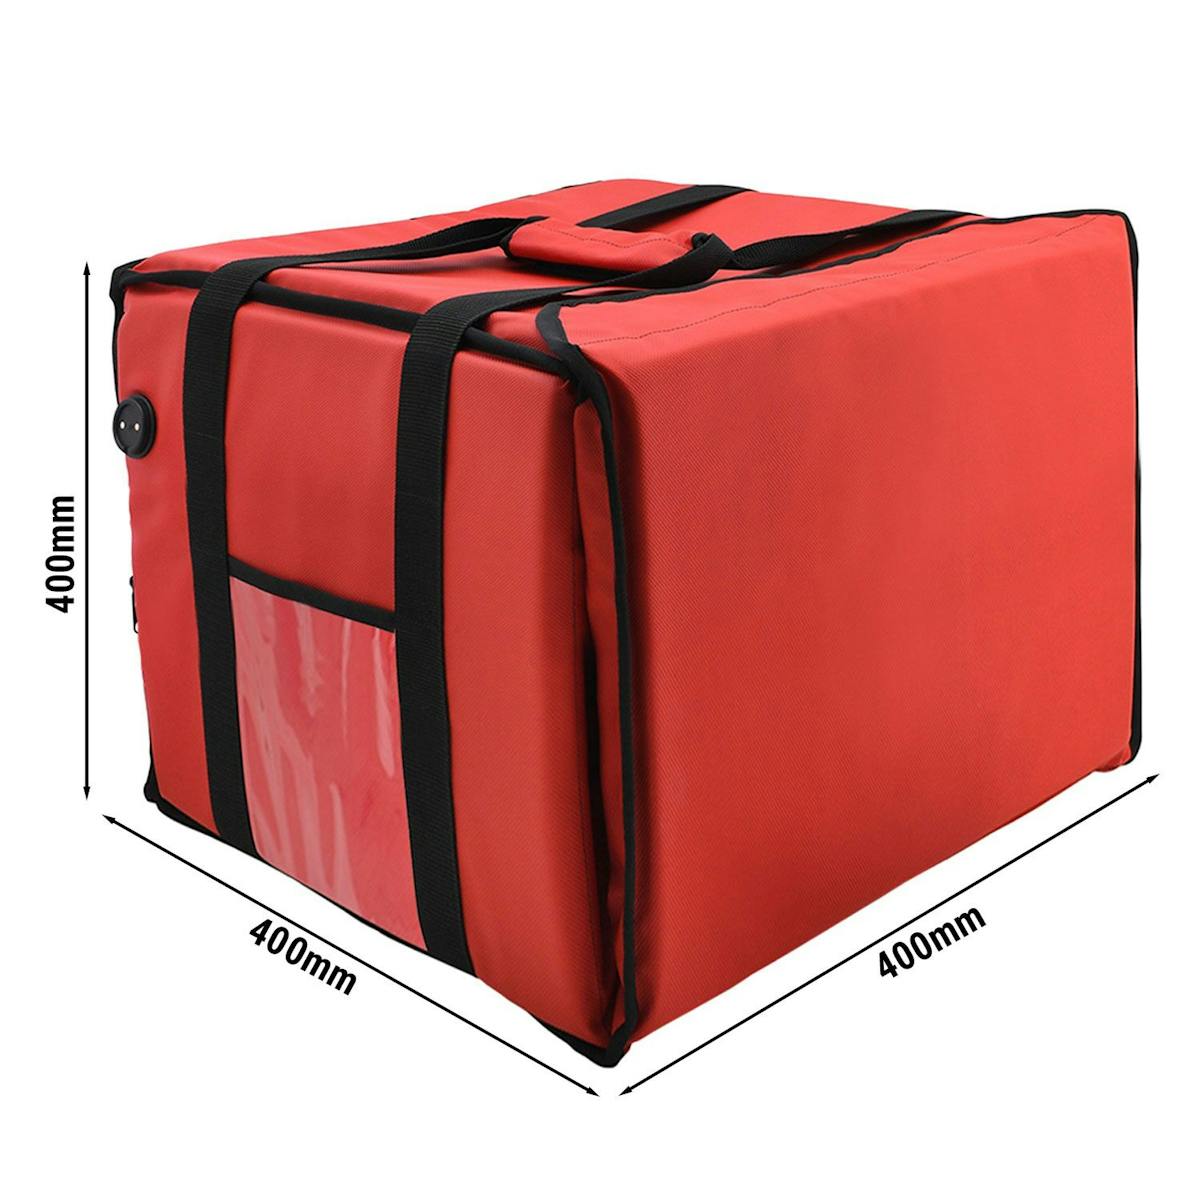 WarmBag/ Pizzabag PRO - Heated delivery bag - for 8 pizza boxes 35x35cm - Red